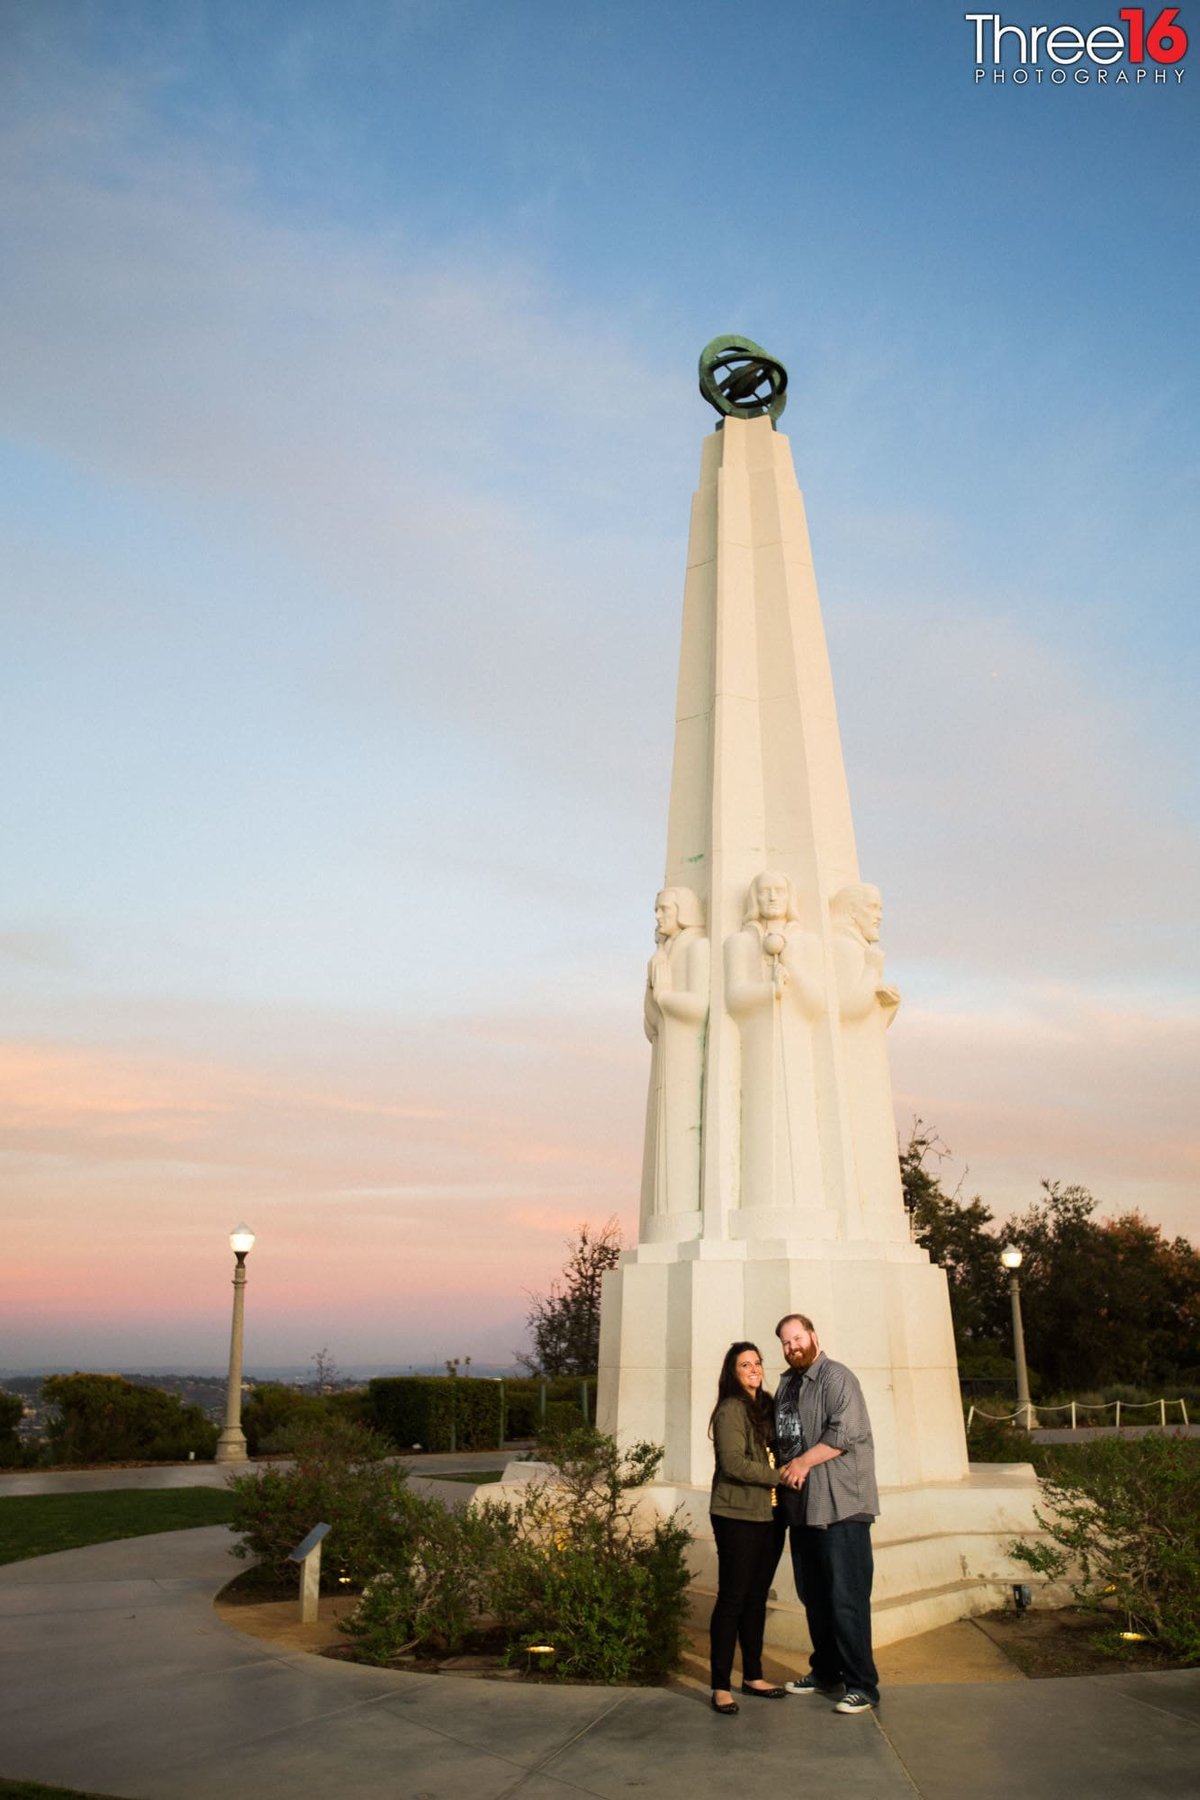 Engaged couple pose together in front of monumental sculpture celebrating astronomers at sunset